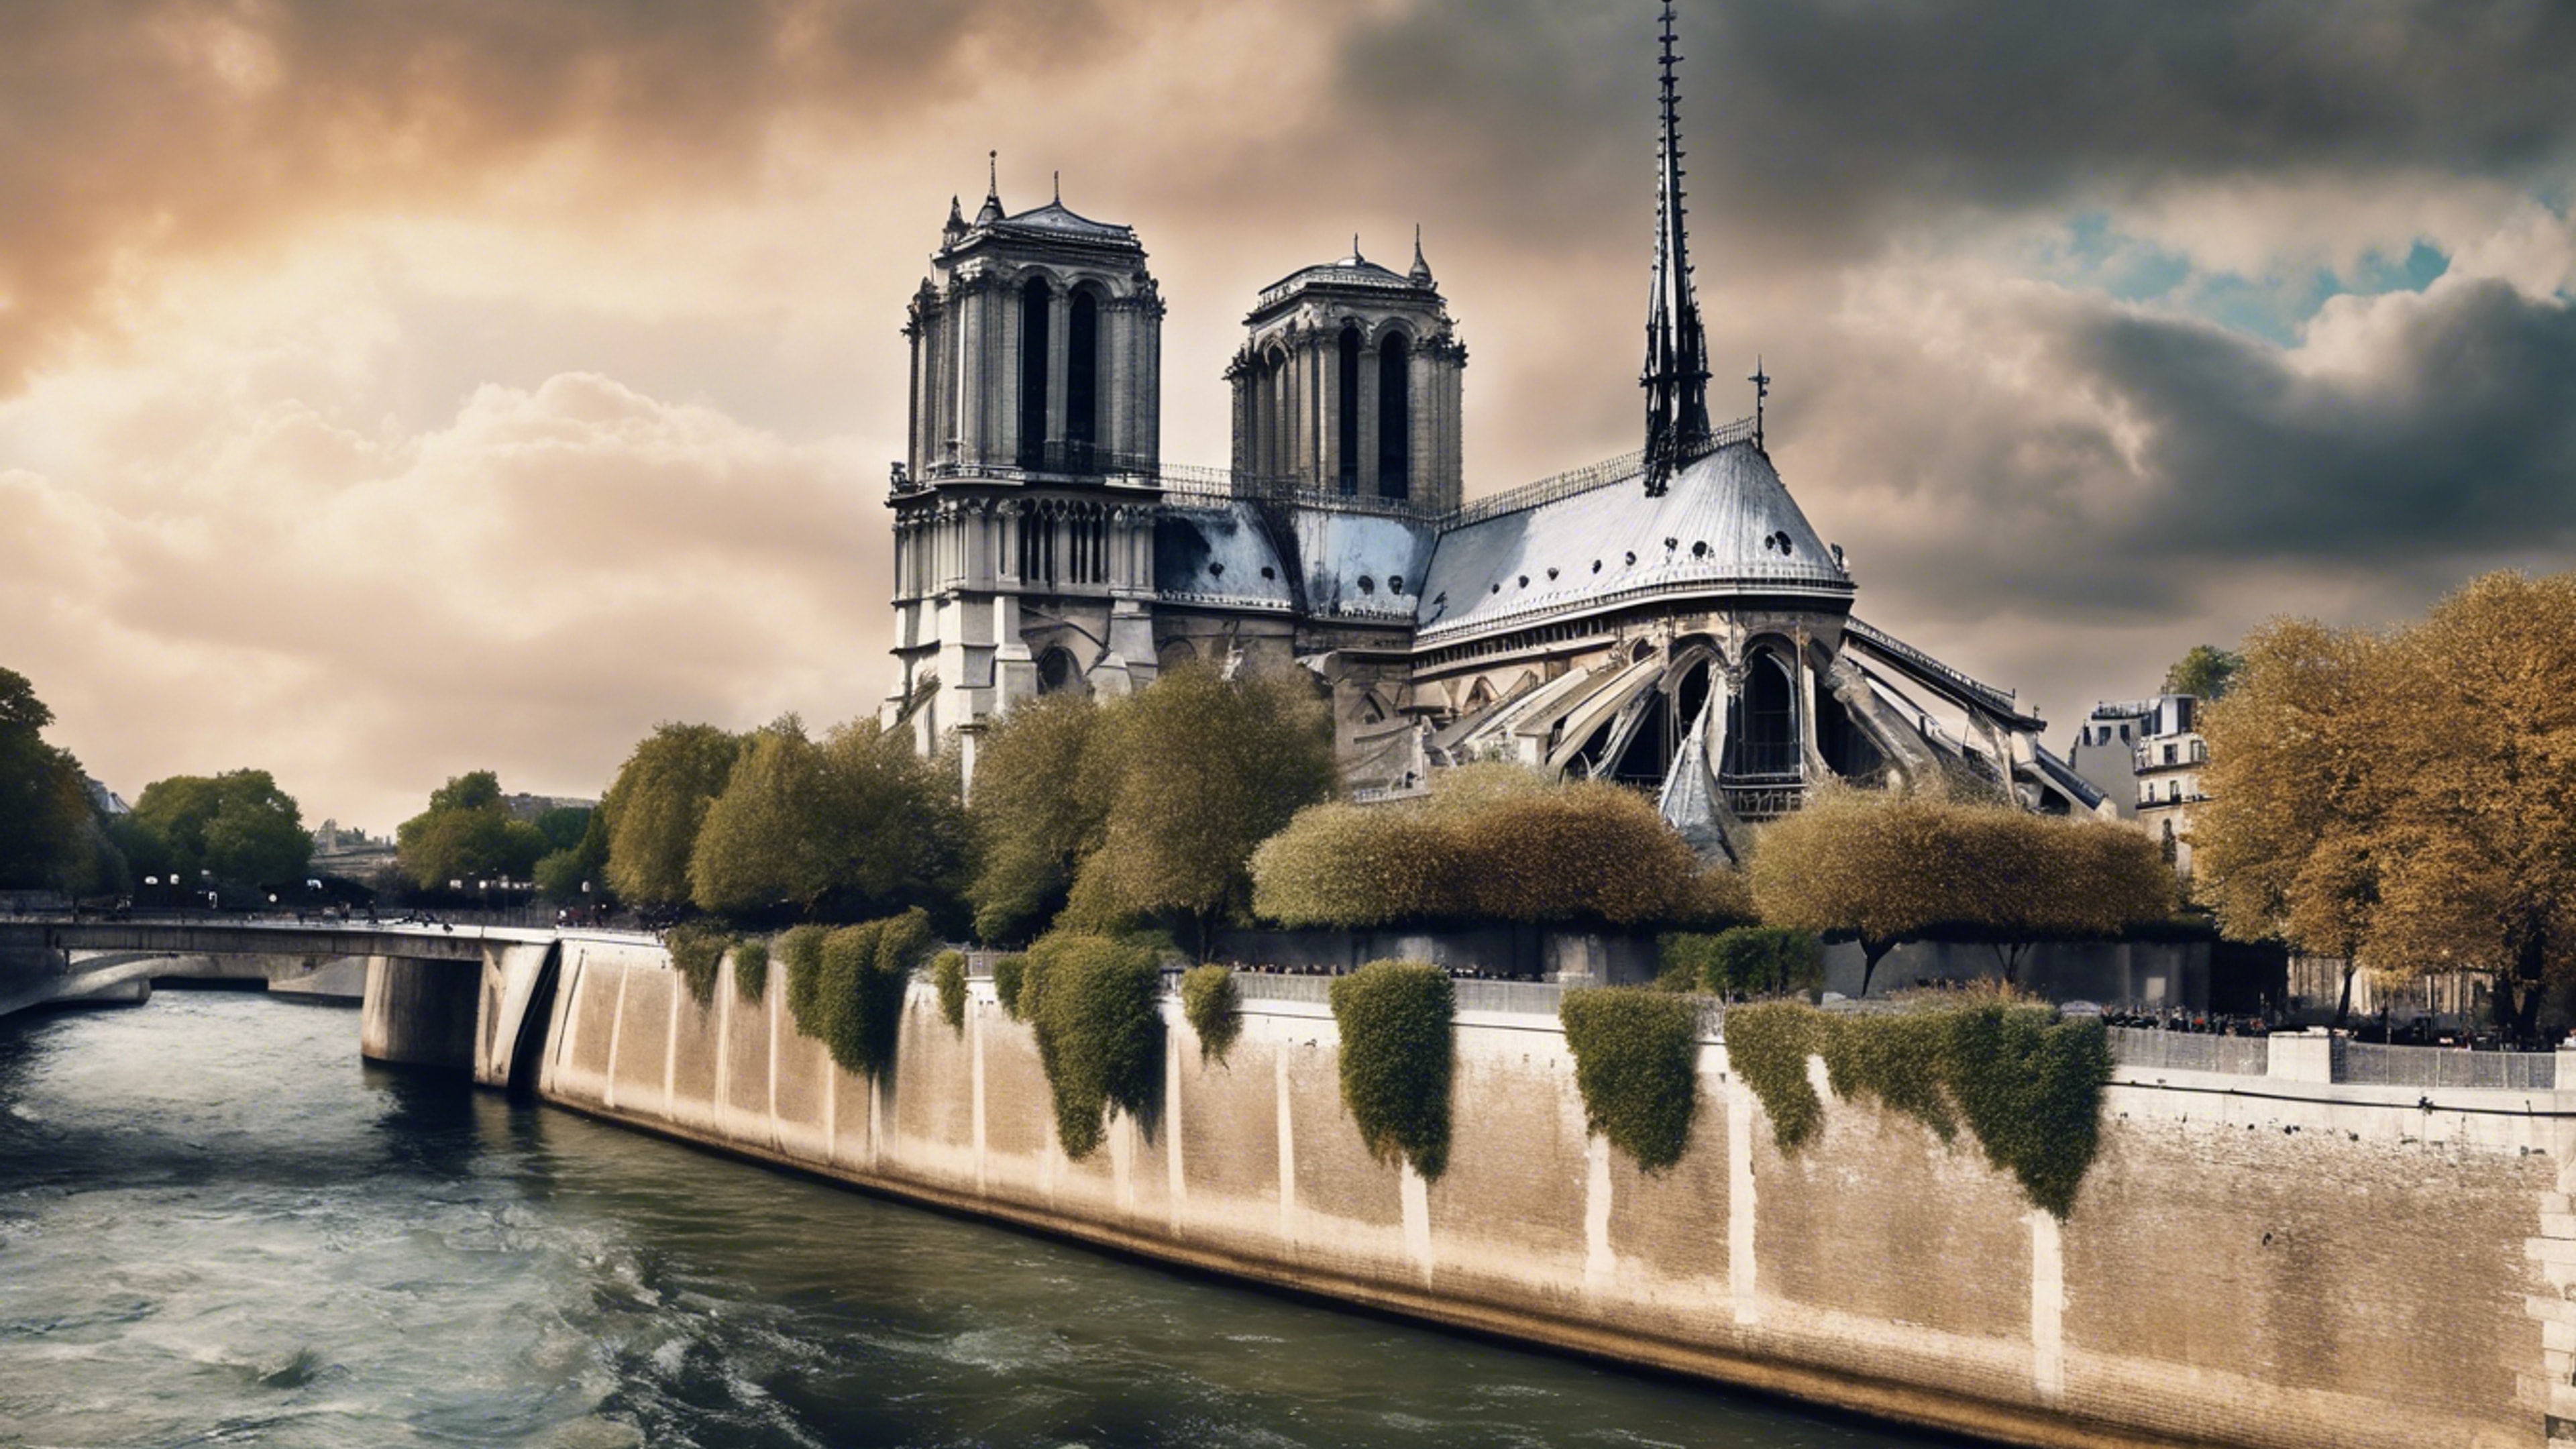 An oil painting of Notre Dame before the fire, standing tall and magnificent beneath the cloudy Paris sky. Обои[e280fae80fc0408eae4b]